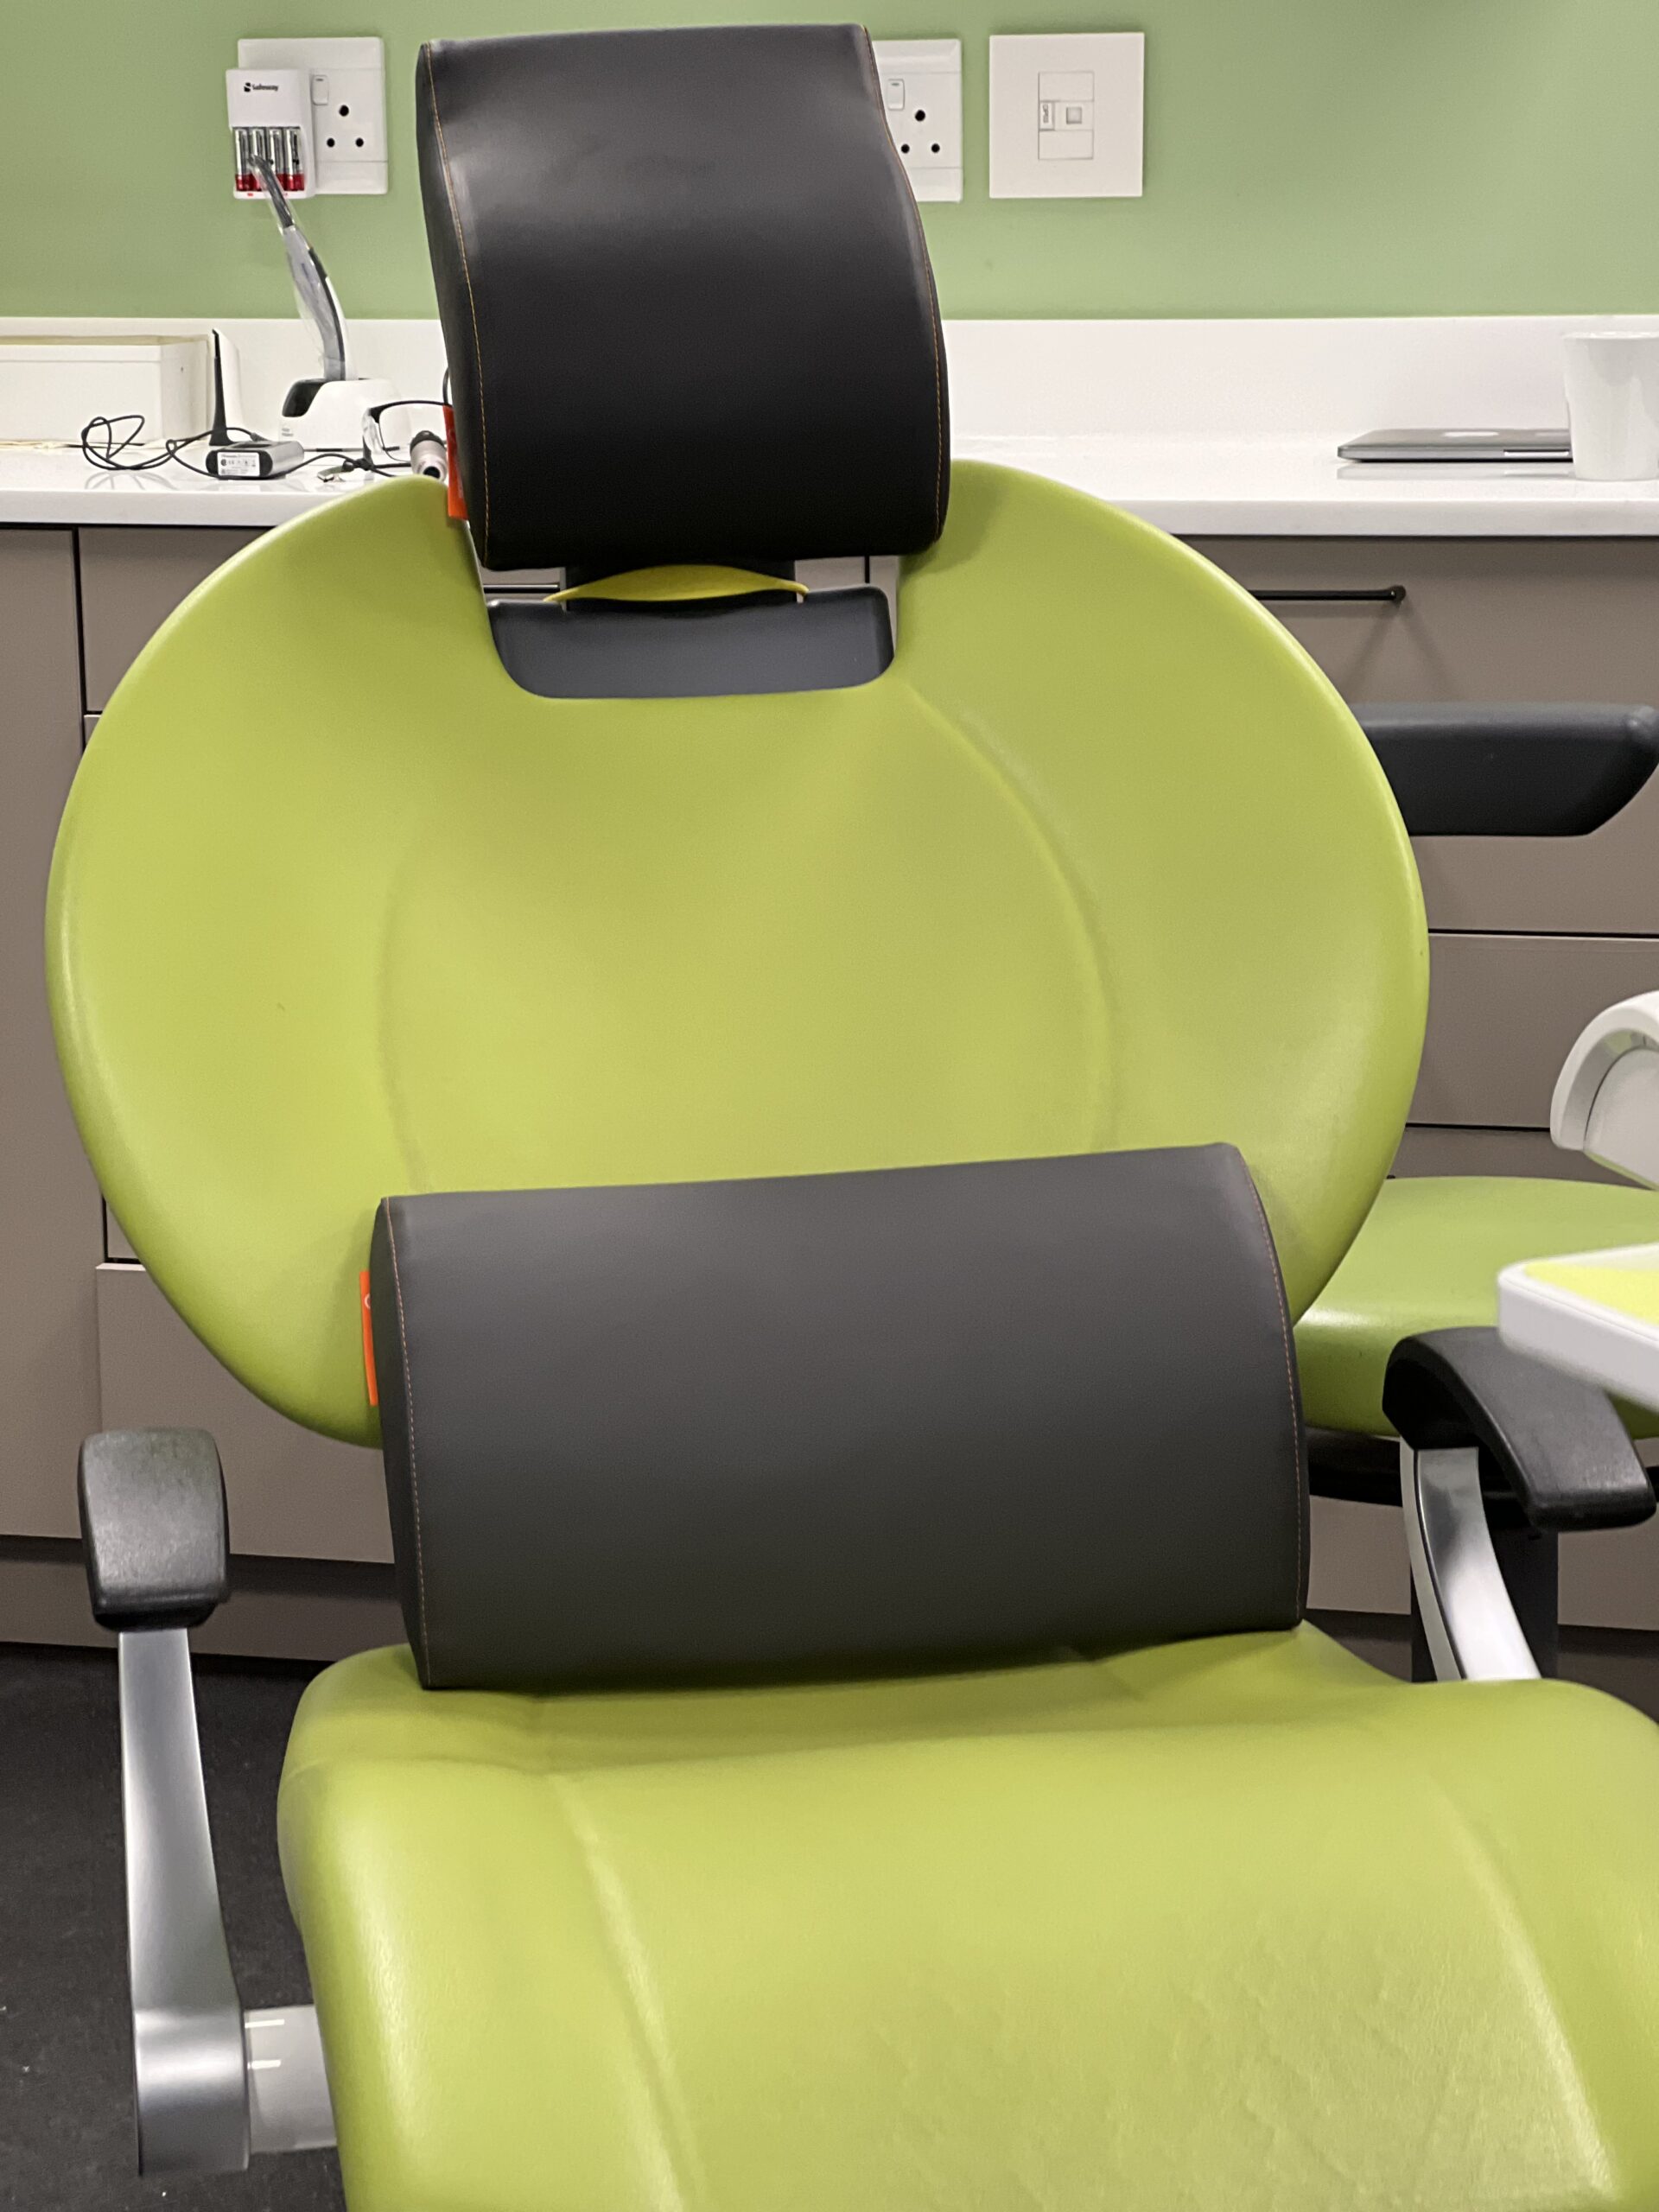 Happynecks neck and lumbar support on patient's chair at Enamel Clinic